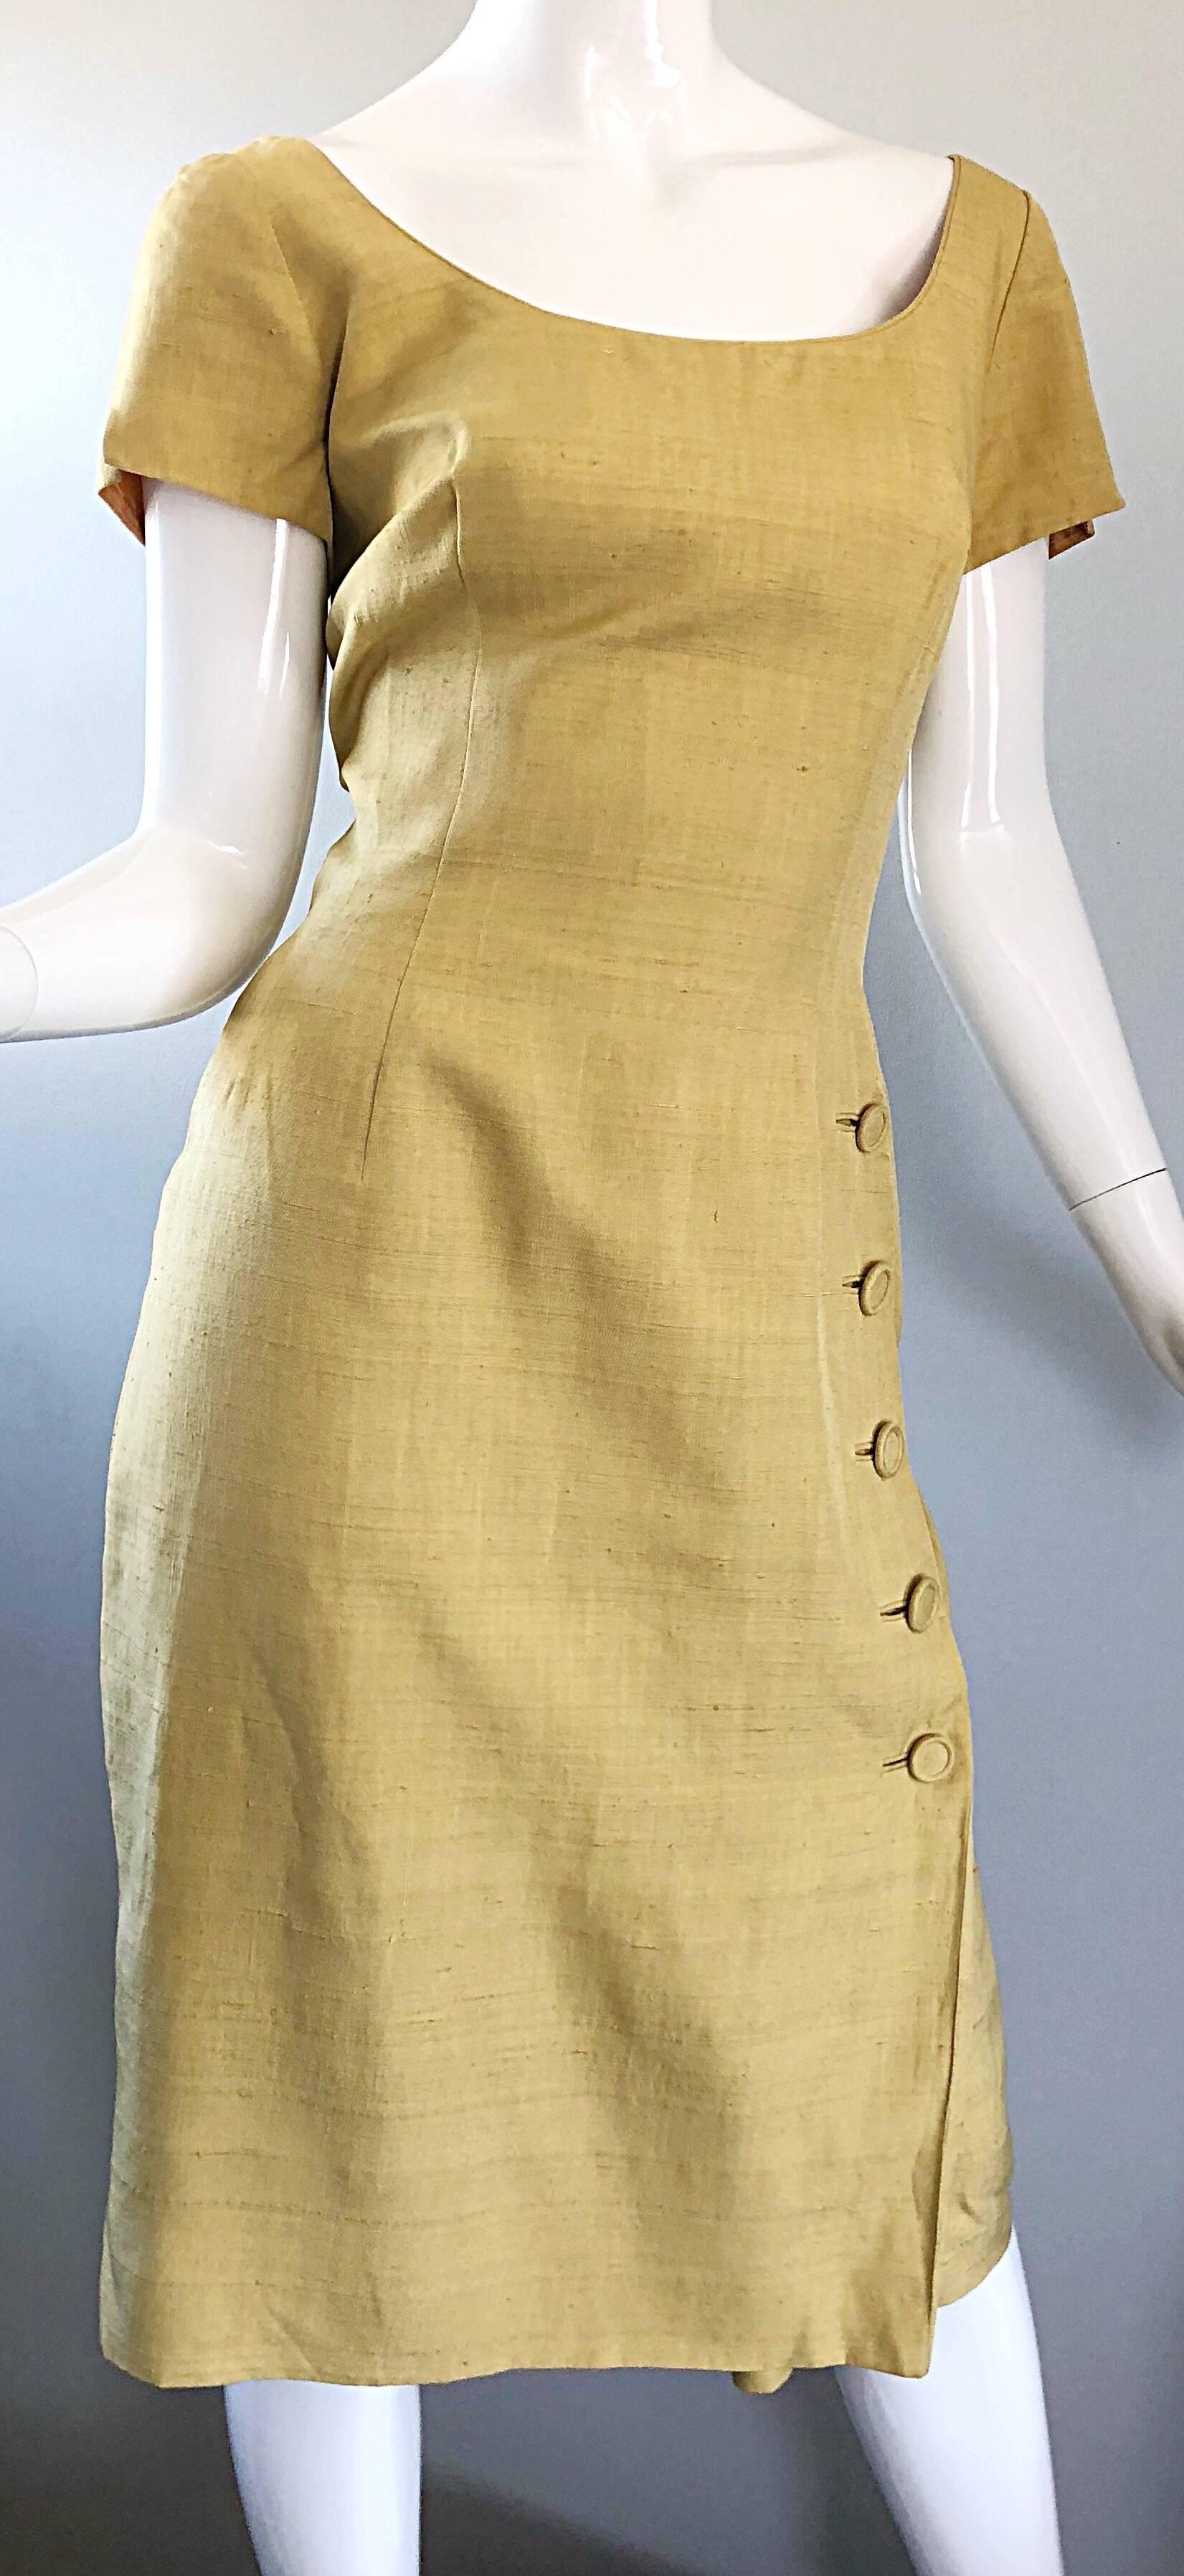 1950s Mr. Blackwell Current Size 10 / 12 Mustard Yellow Silk Vintage 50s Dress For Sale 3